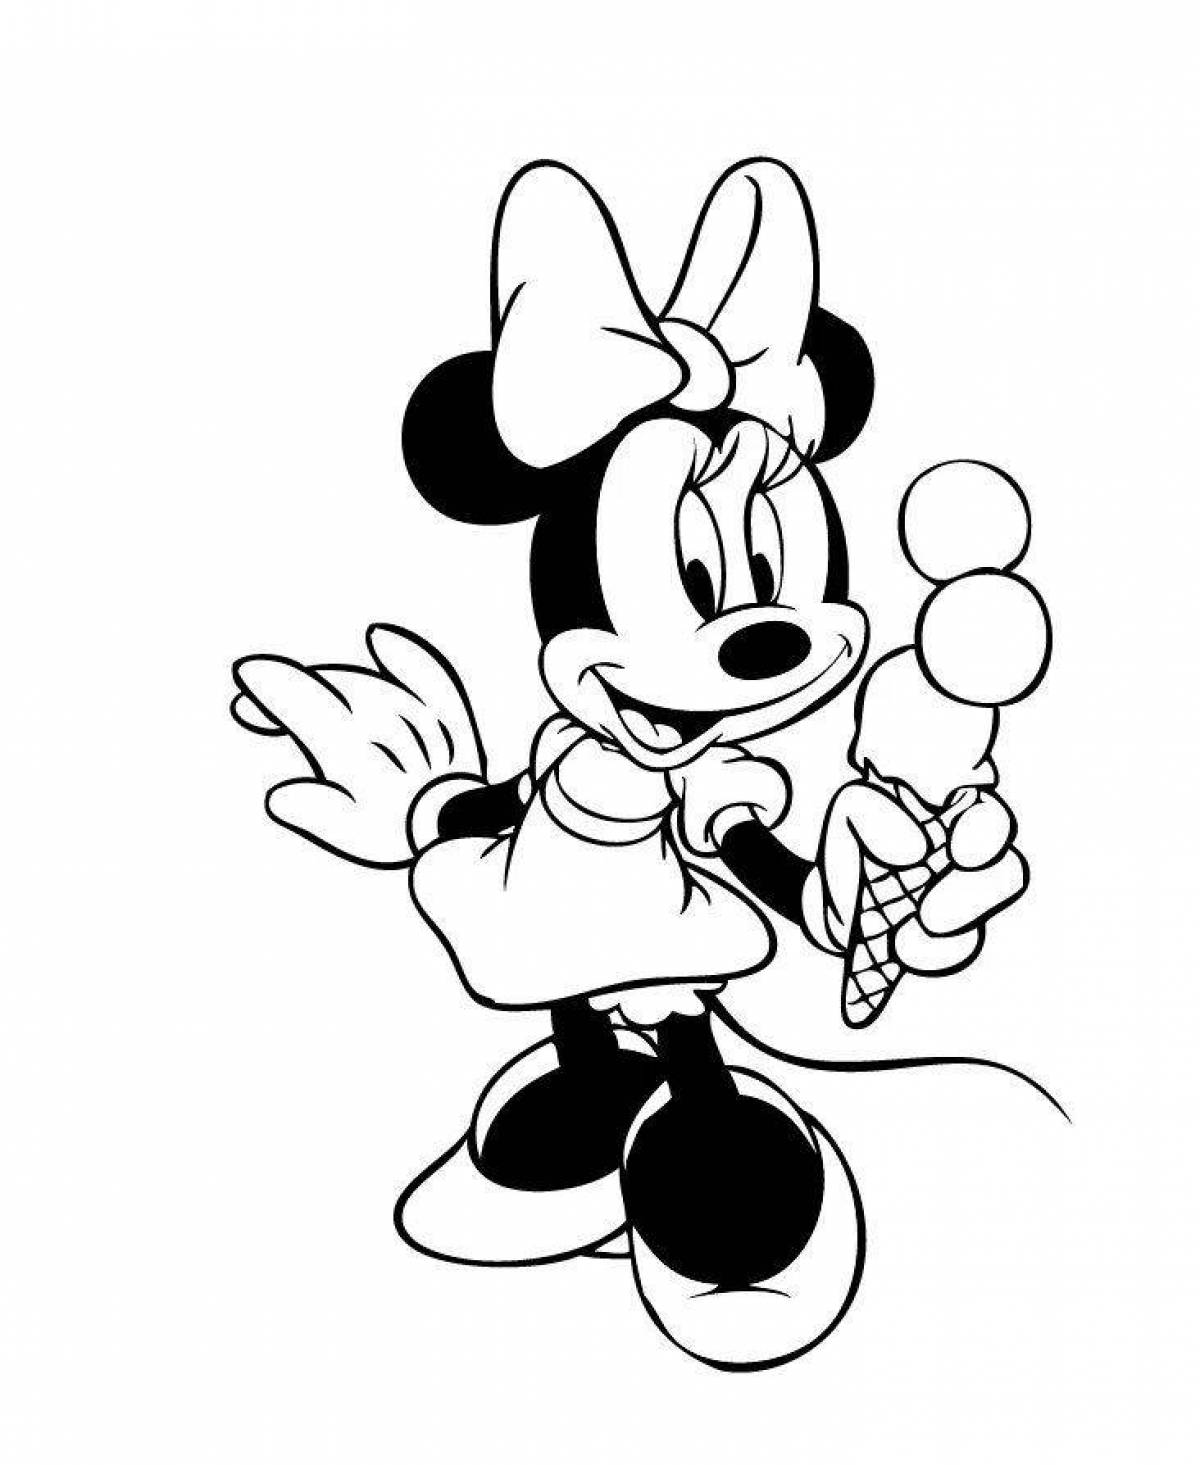 Mickey mouse wonderful coloring book for kids